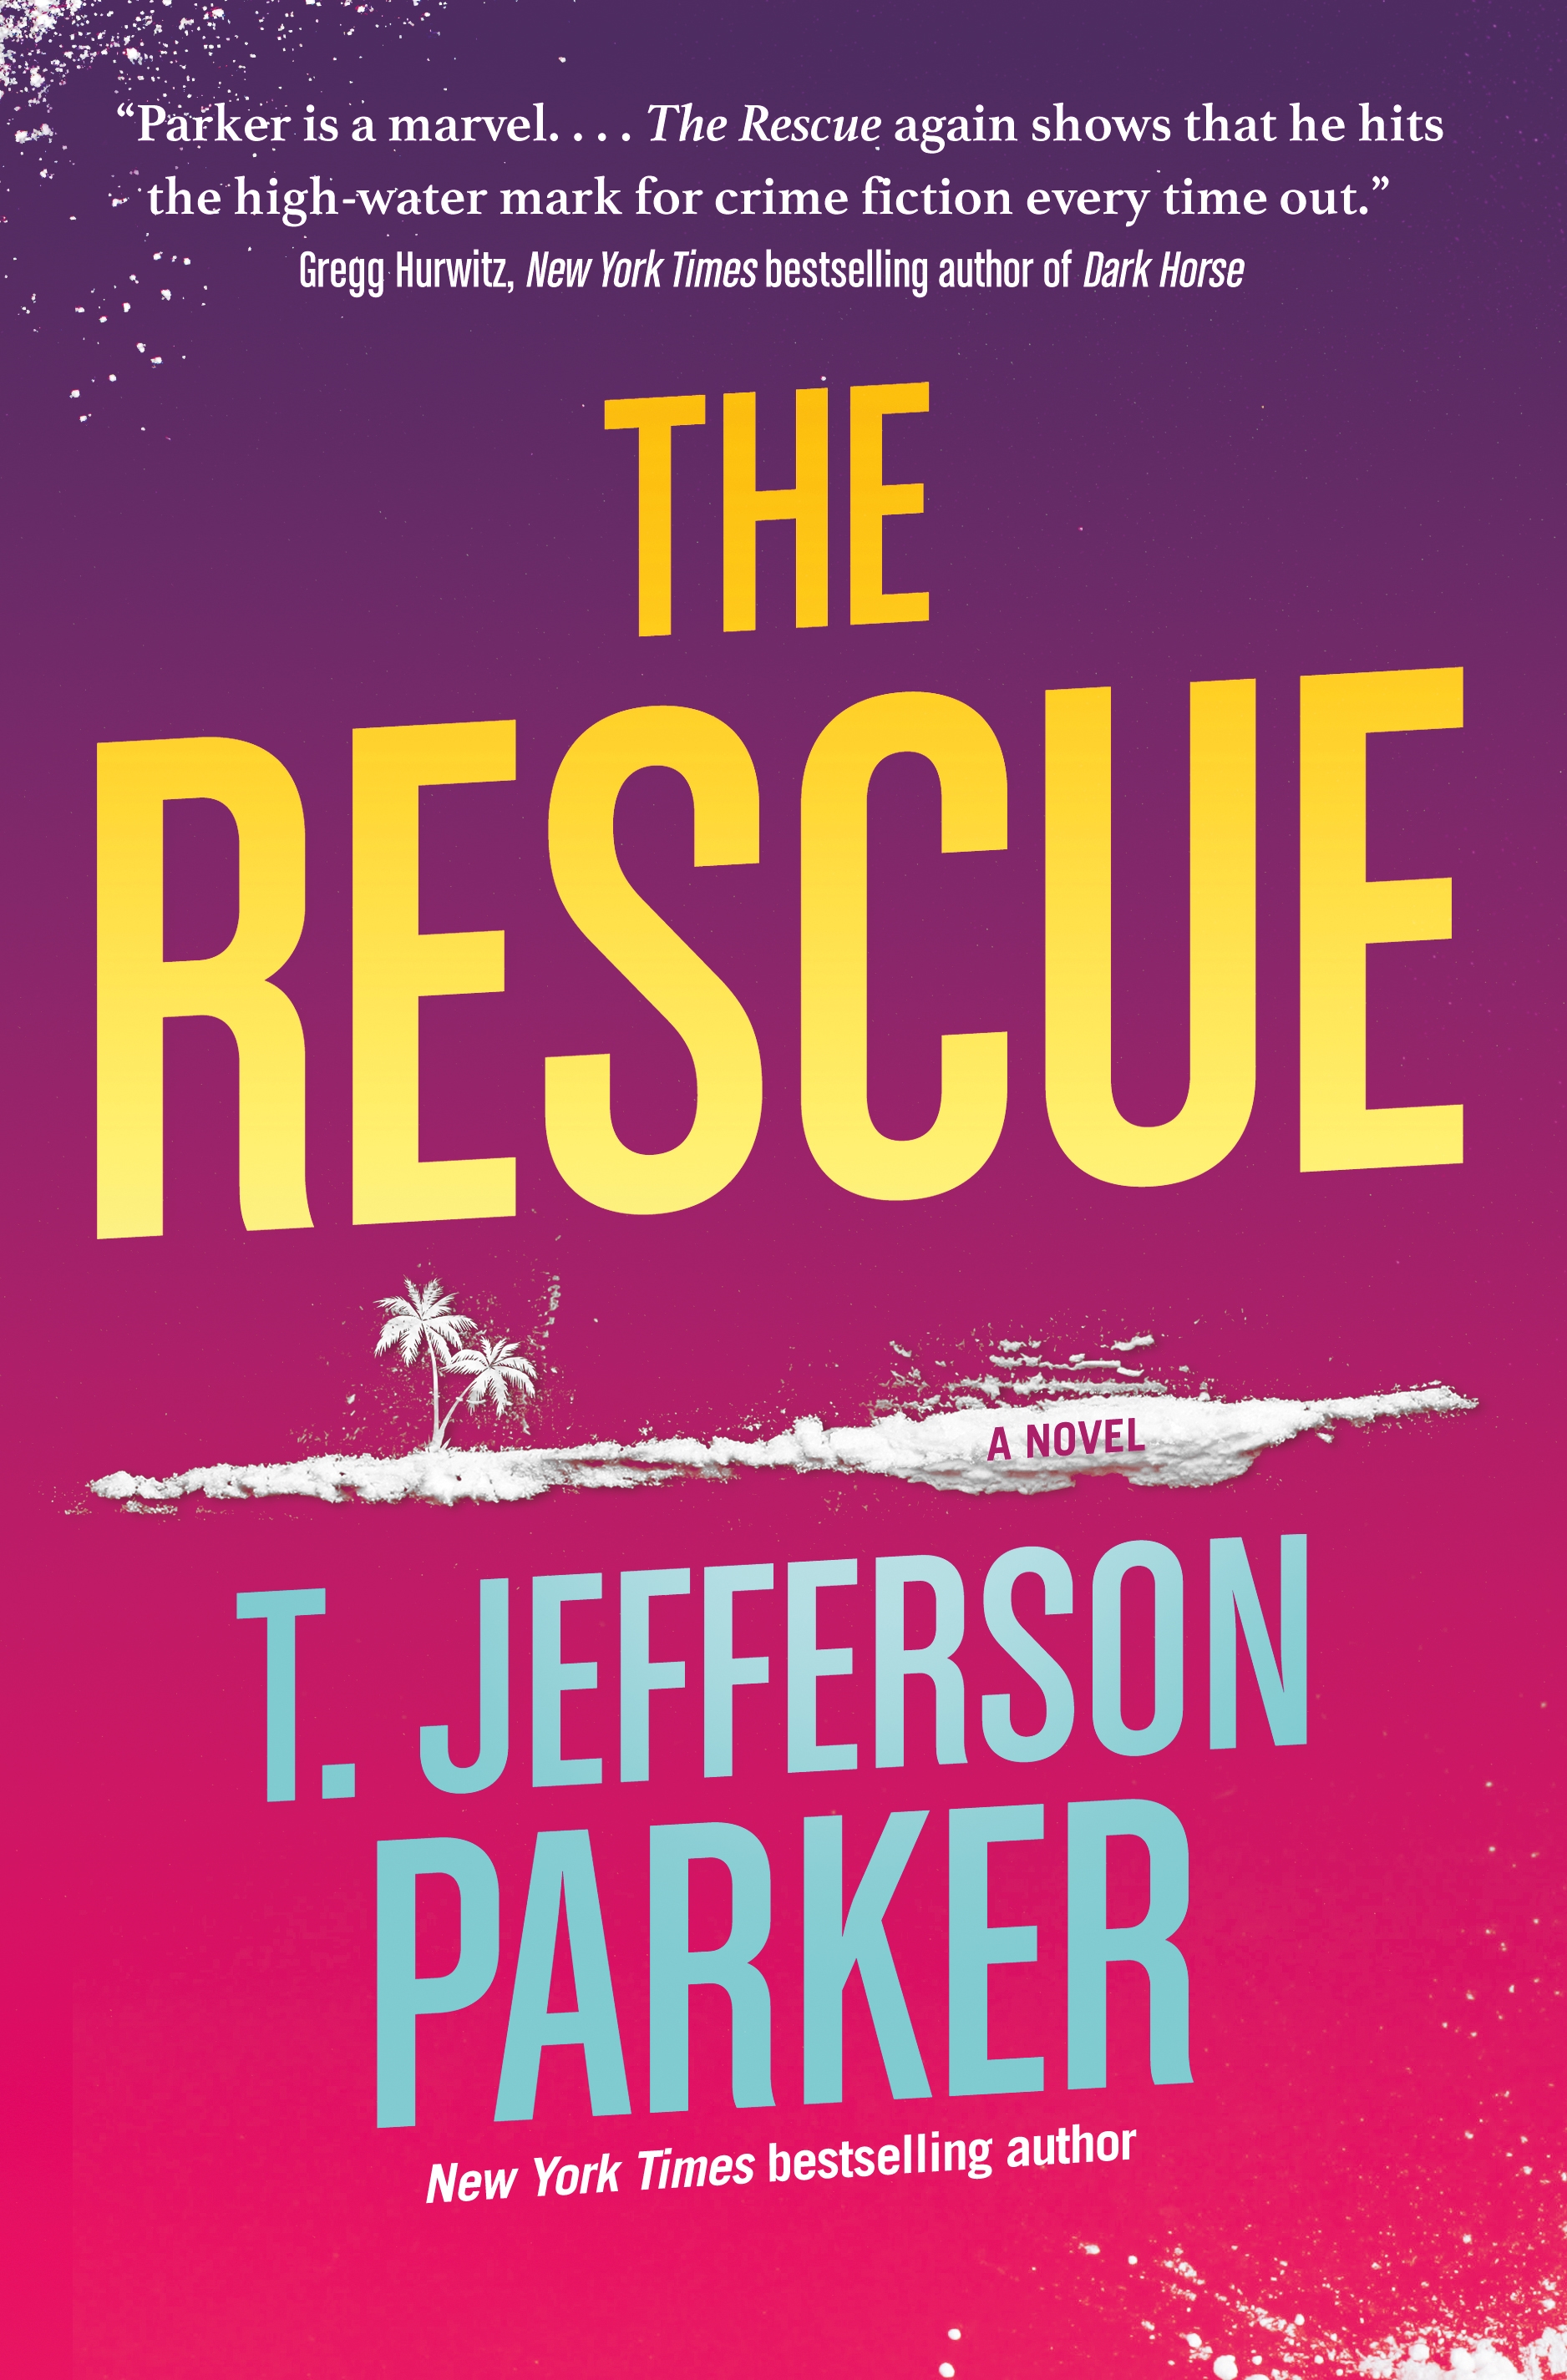 The Rescue by T. Jefferson Parker